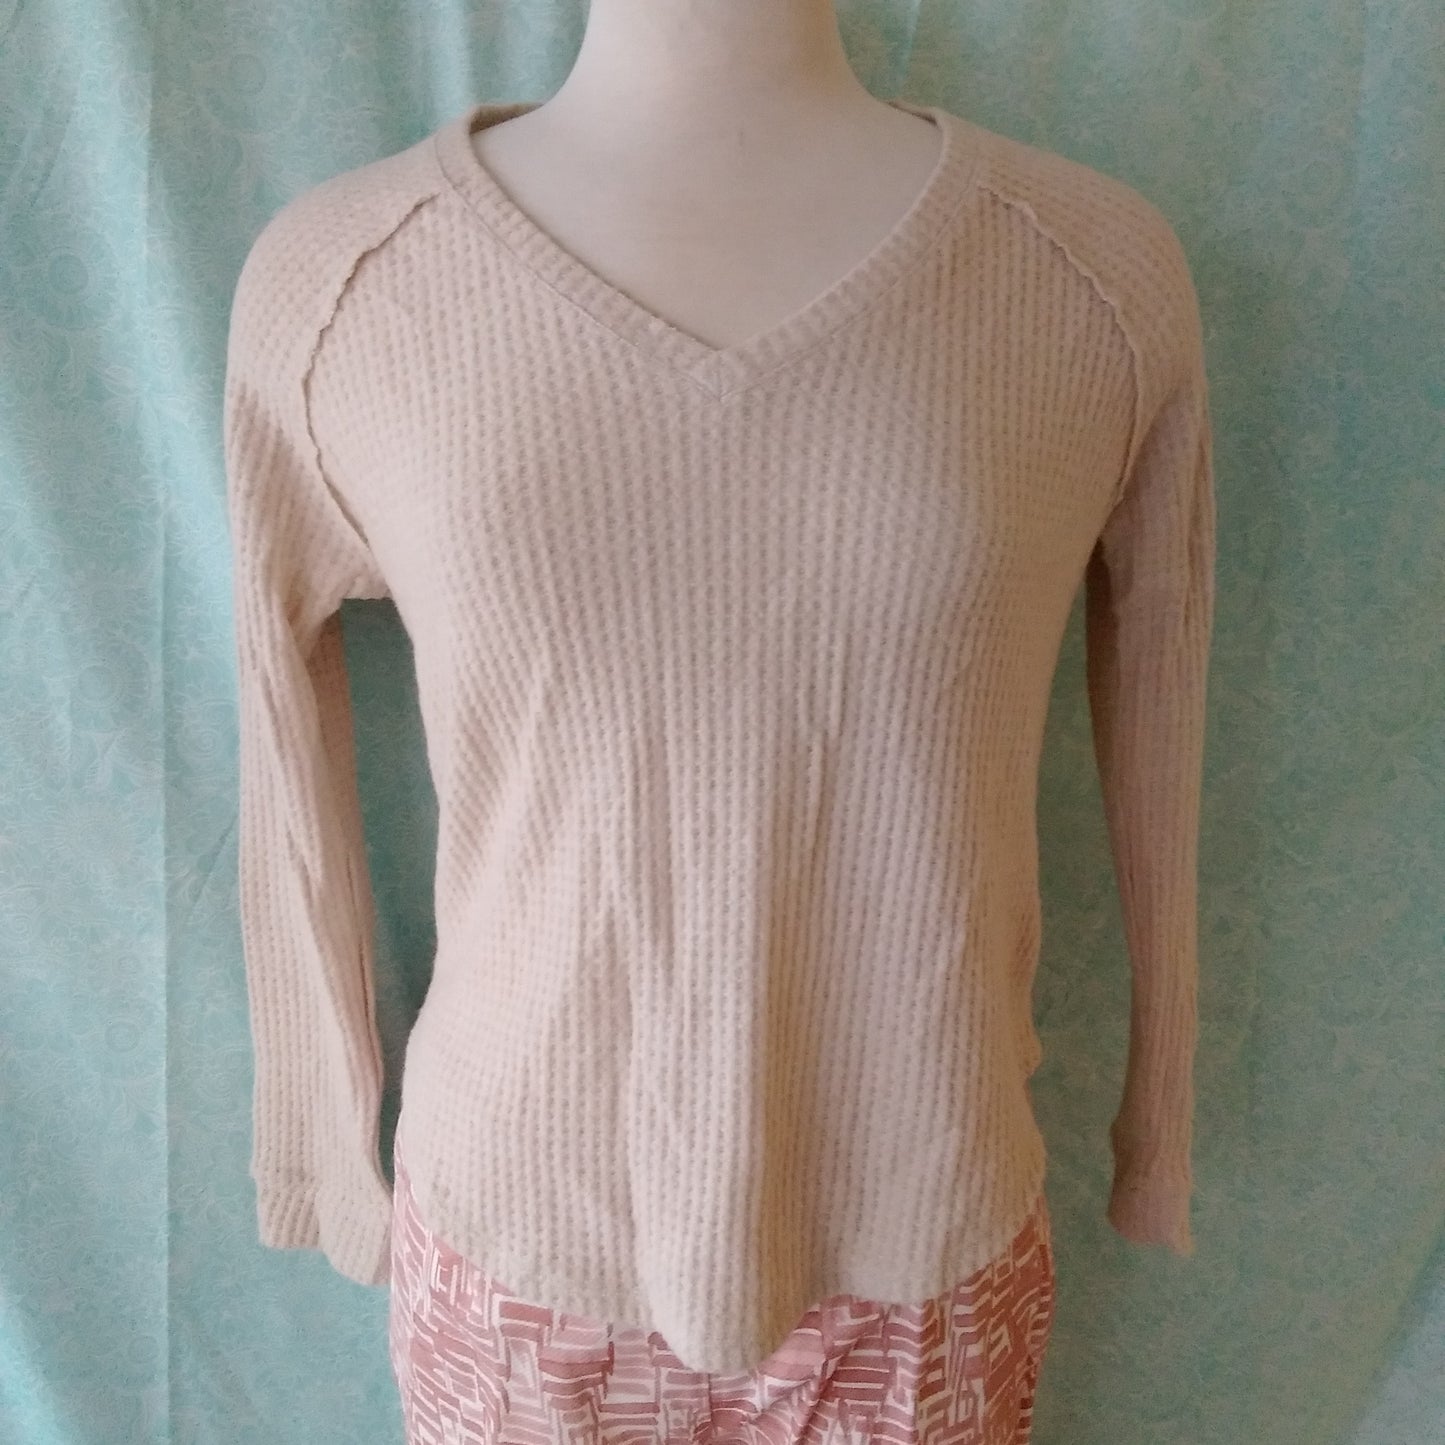 American Eagle Outfitters Tan Soft and Sexy Sweater NWT- Size XS